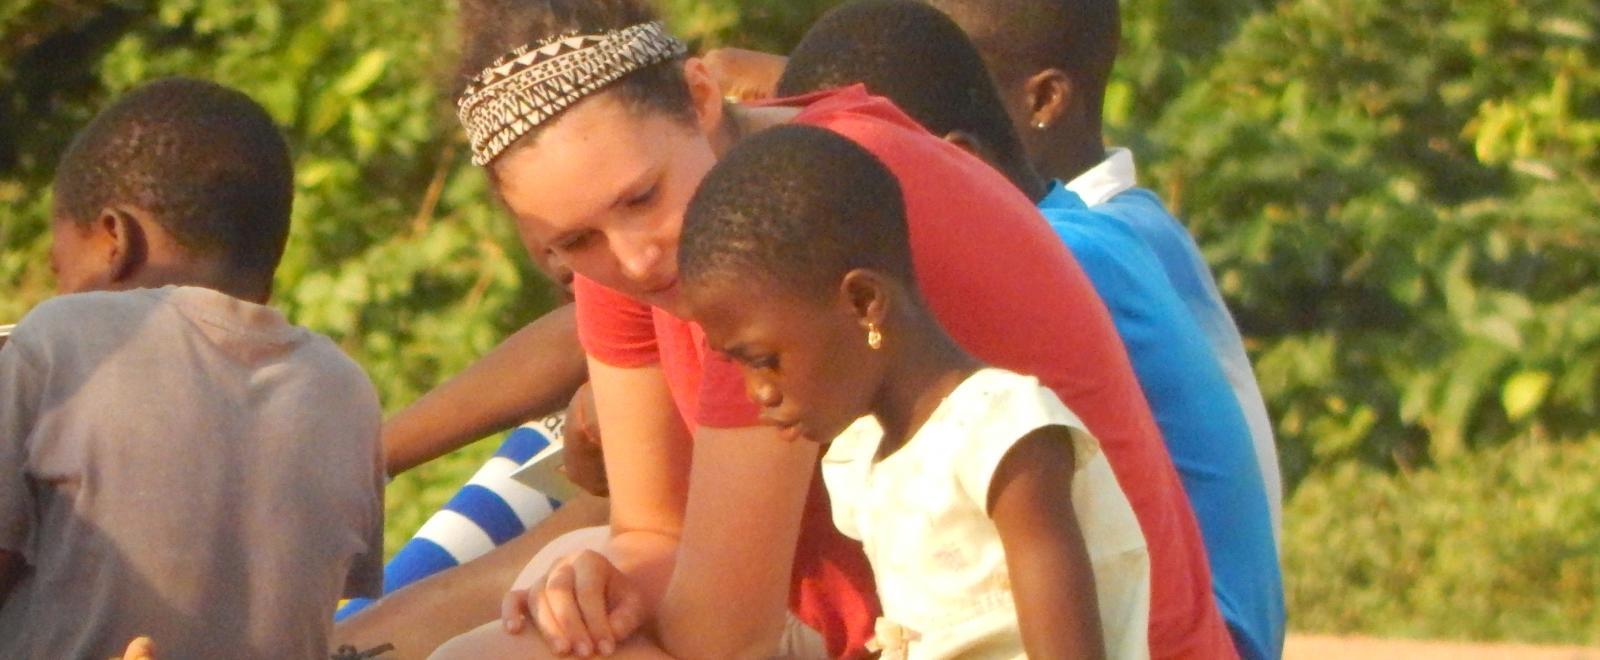 A Projects Abroad intern gains social work experience in Ghana by working through activities with a child. 